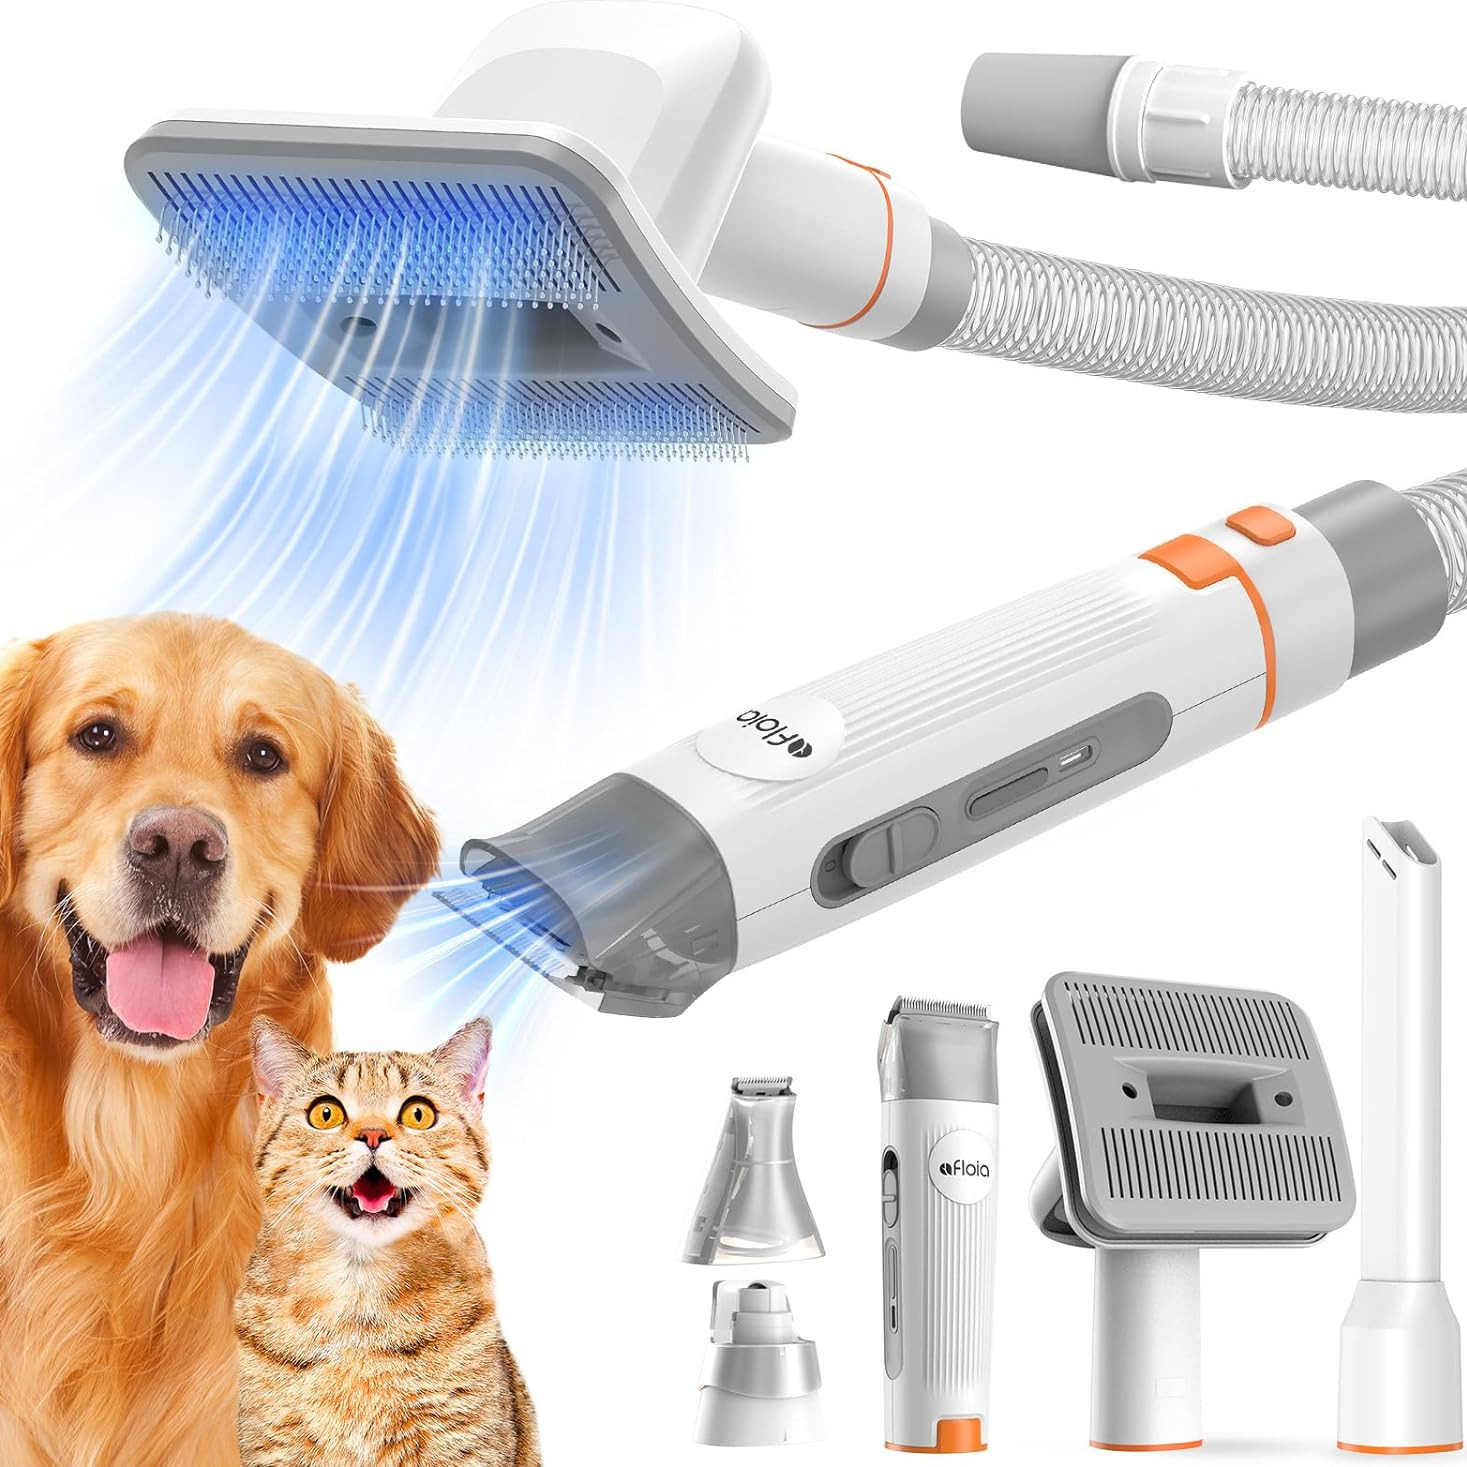 

Pet Grooming Vacuum Attachments, Dog Hair Vacuum Groomer, 5 In 1 Dog Grooming Kit With Clippers Nail Grinder Shedding Brush For Vacuum Cleaners Like , Shark, , Eureka, Etc